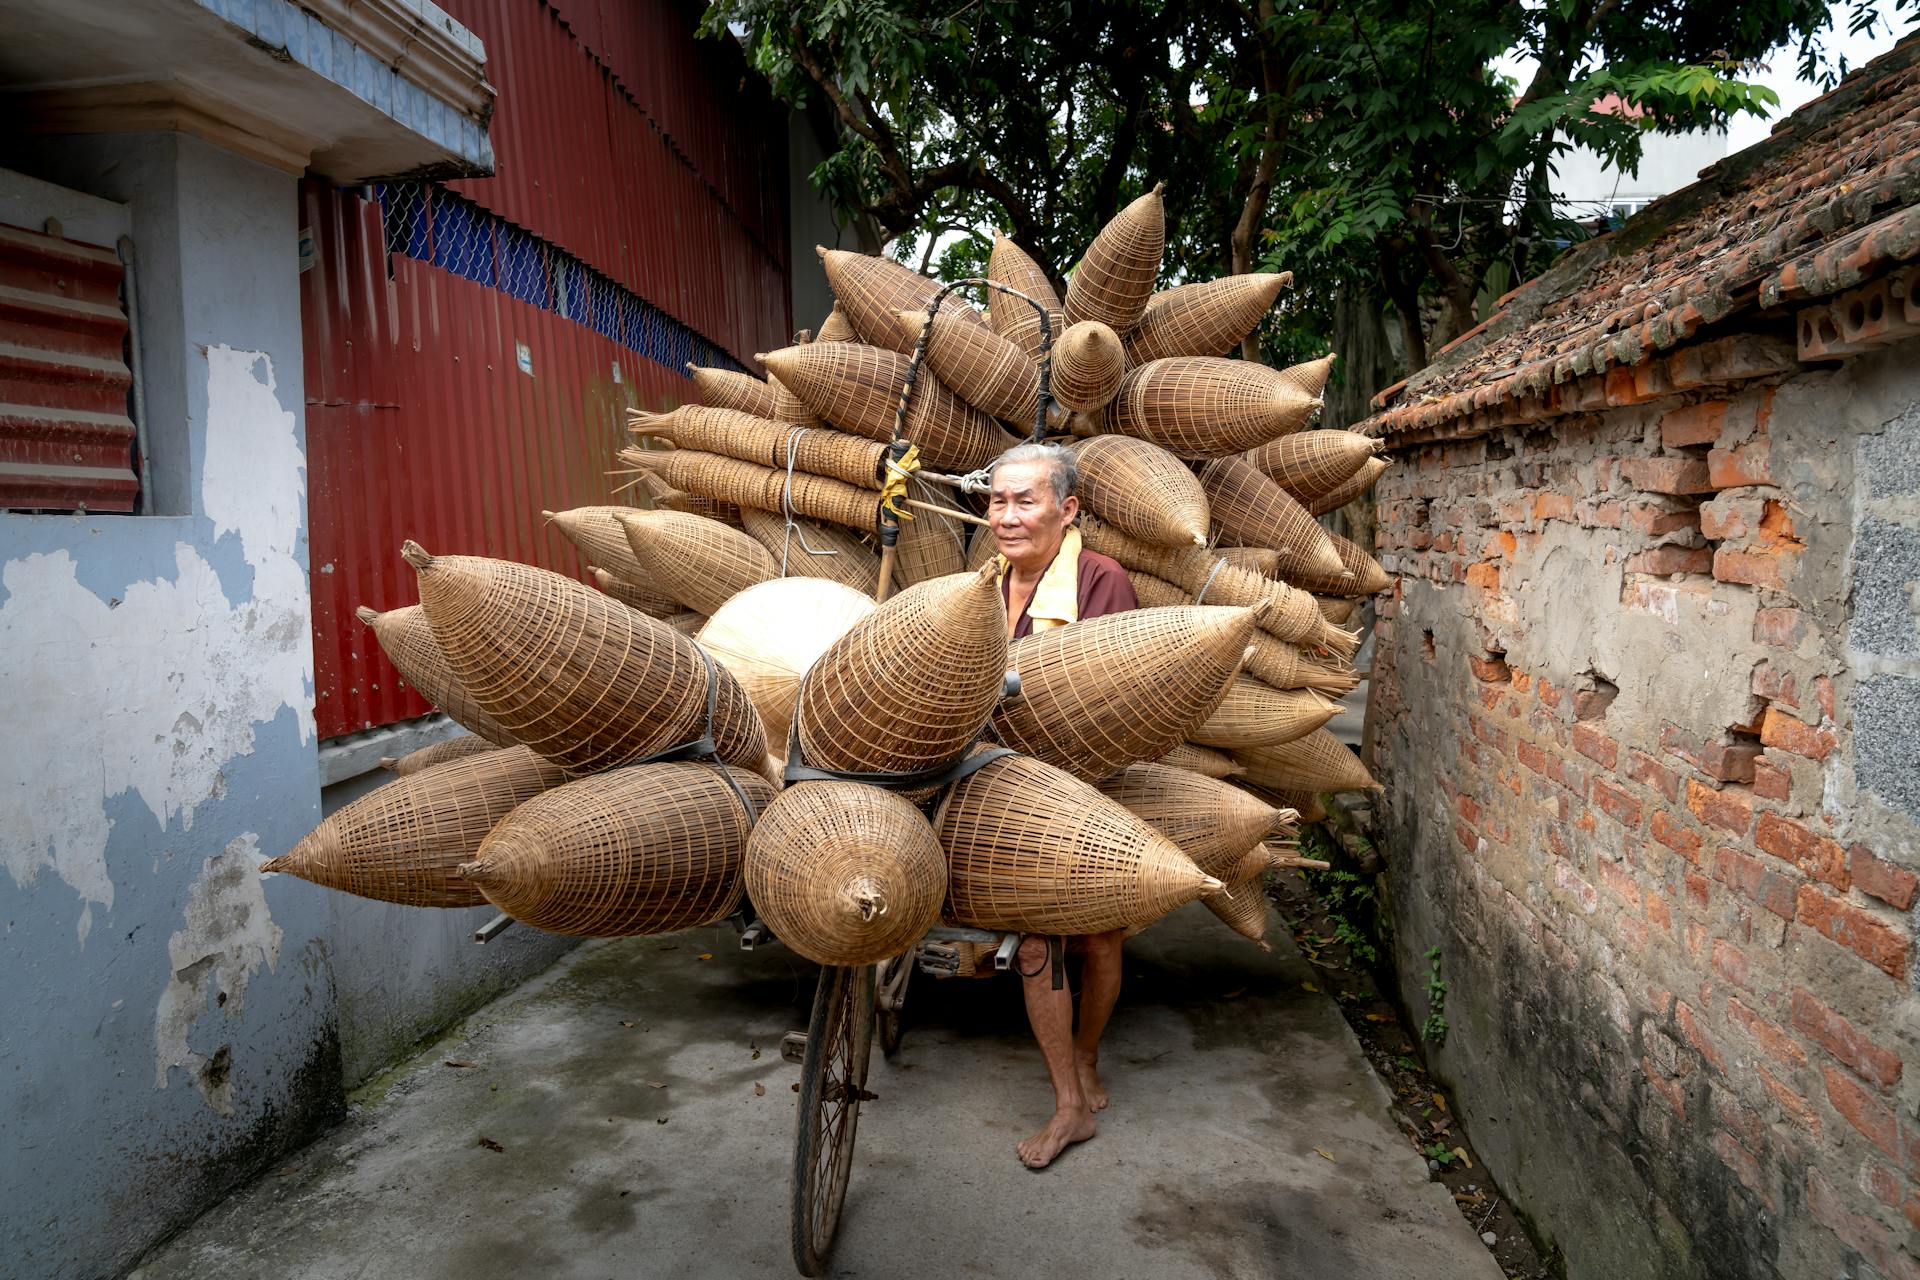 Elderly Asian man carrying bamboo fish traps on street in poor district of village in daylight